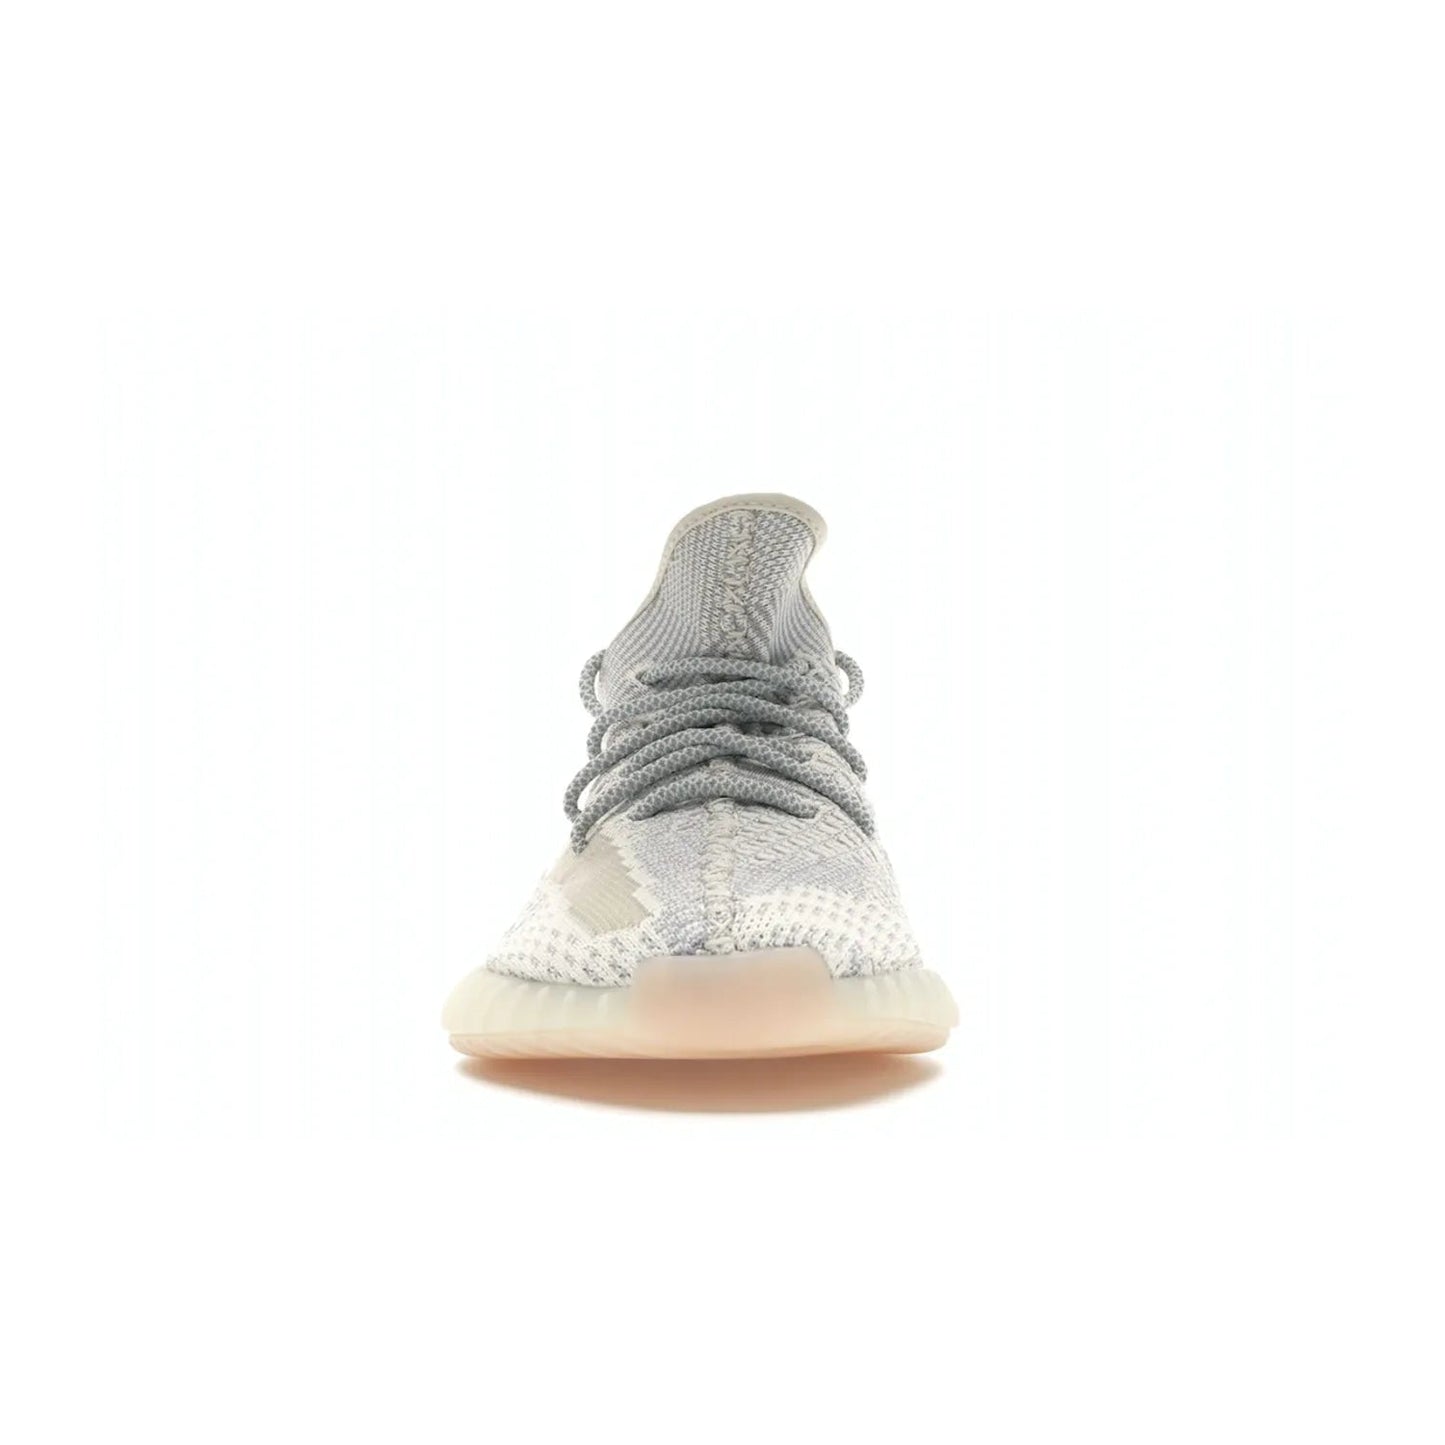 adidas Yeezy Boost 350 V2 Lundmark (Non Reflective) - Image 10 - Only at www.BallersClubKickz.com - Shop the exclusive adidas Yeezy Boost 350 V2 Lundmark with a subtle summer color, mesh upper, white-to-cream transitional midsole, light tan outsole, and pink middle stripe. Comfort and style come together in this perfect summer 350 V2. Released on July 11, 2019.